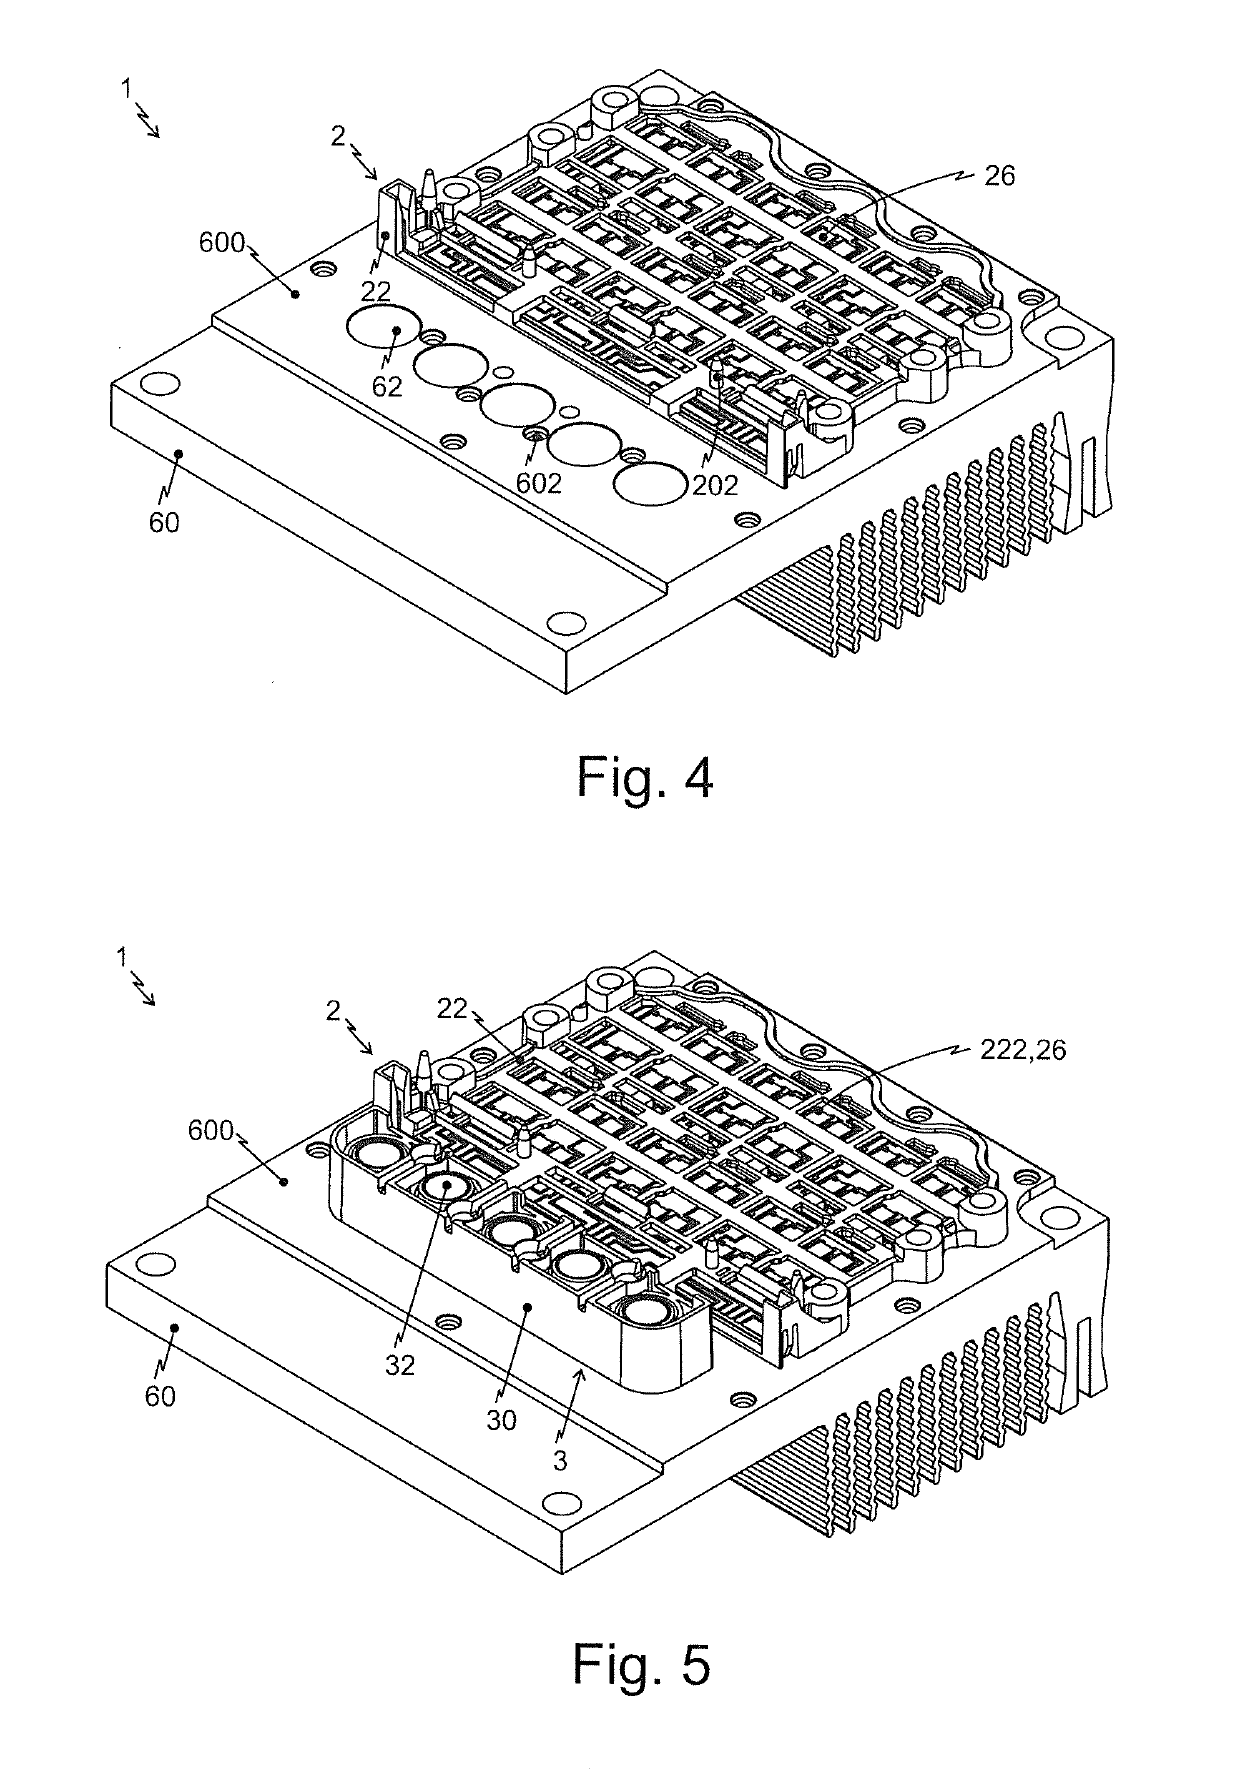 Method for producing a power electronics system